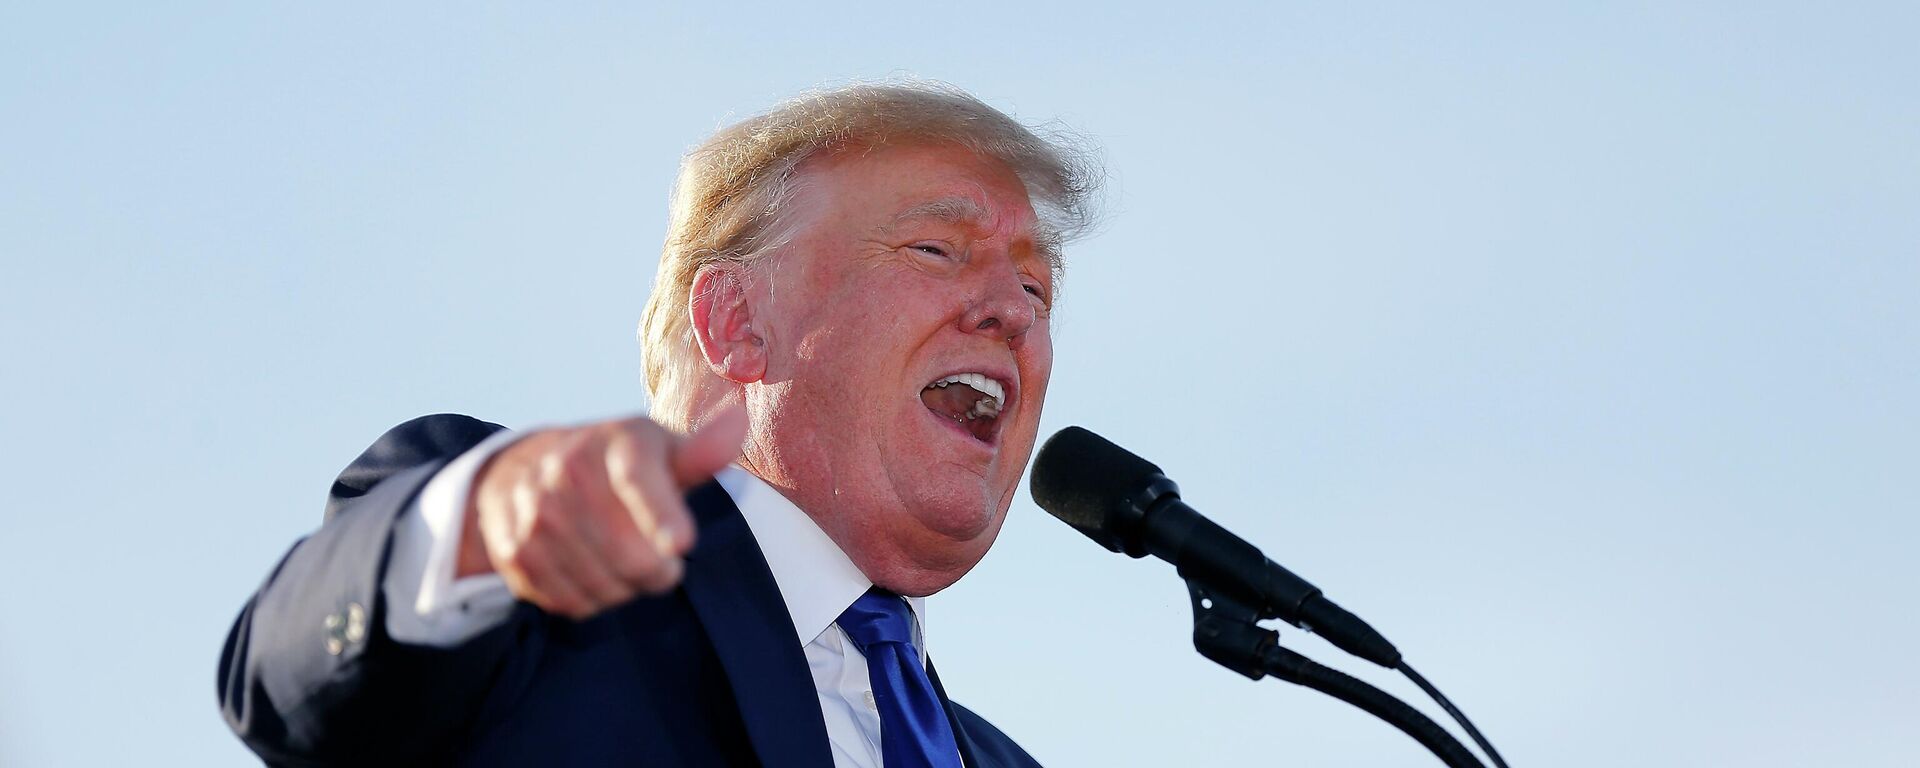 Former President Donald Trump speaks at a rally at the Delaware County Fairgrounds, Saturday, April 23, 2022, in Delaware, Ohio, to endorse Republican candidates ahead of the Ohio primary on May 3. - Sputnik International, 1920, 11.05.2022